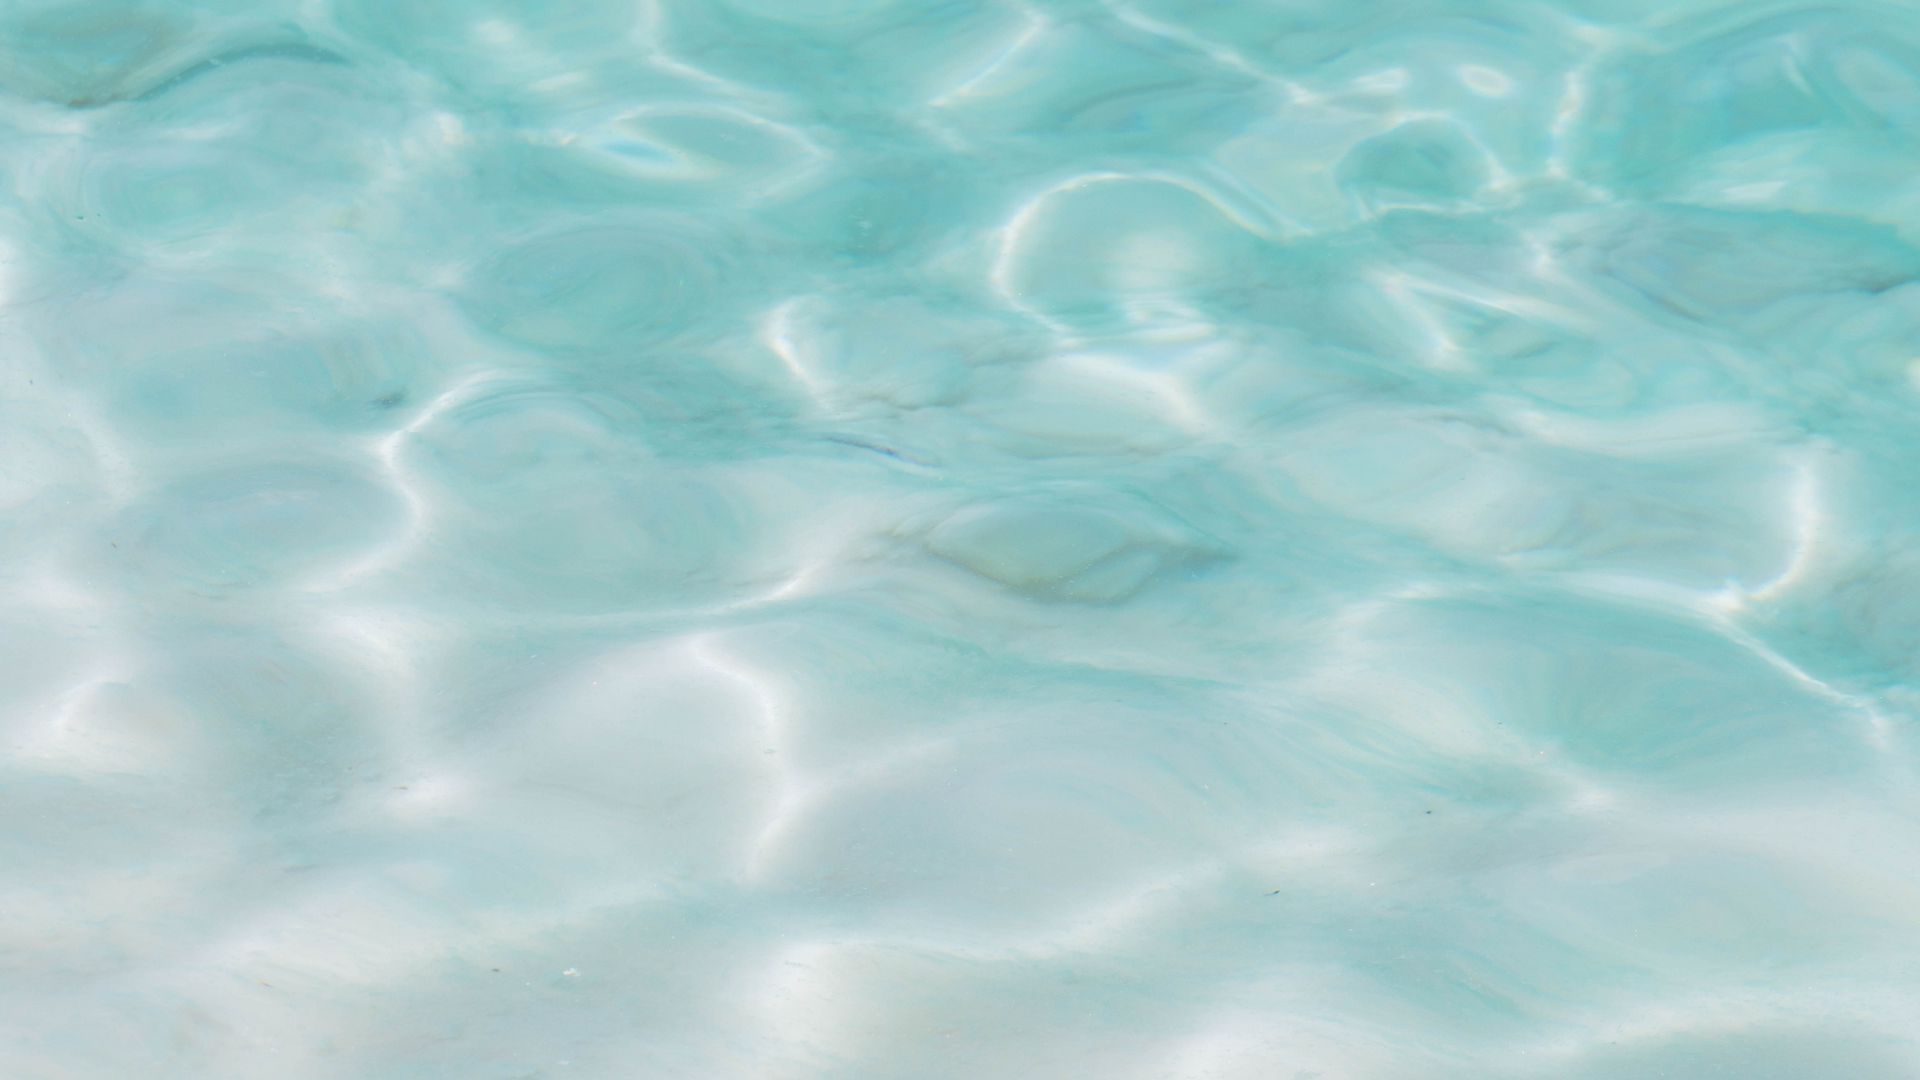 Download wallpaper 1920x1080 waves, ripples, water, transparent, blue ...